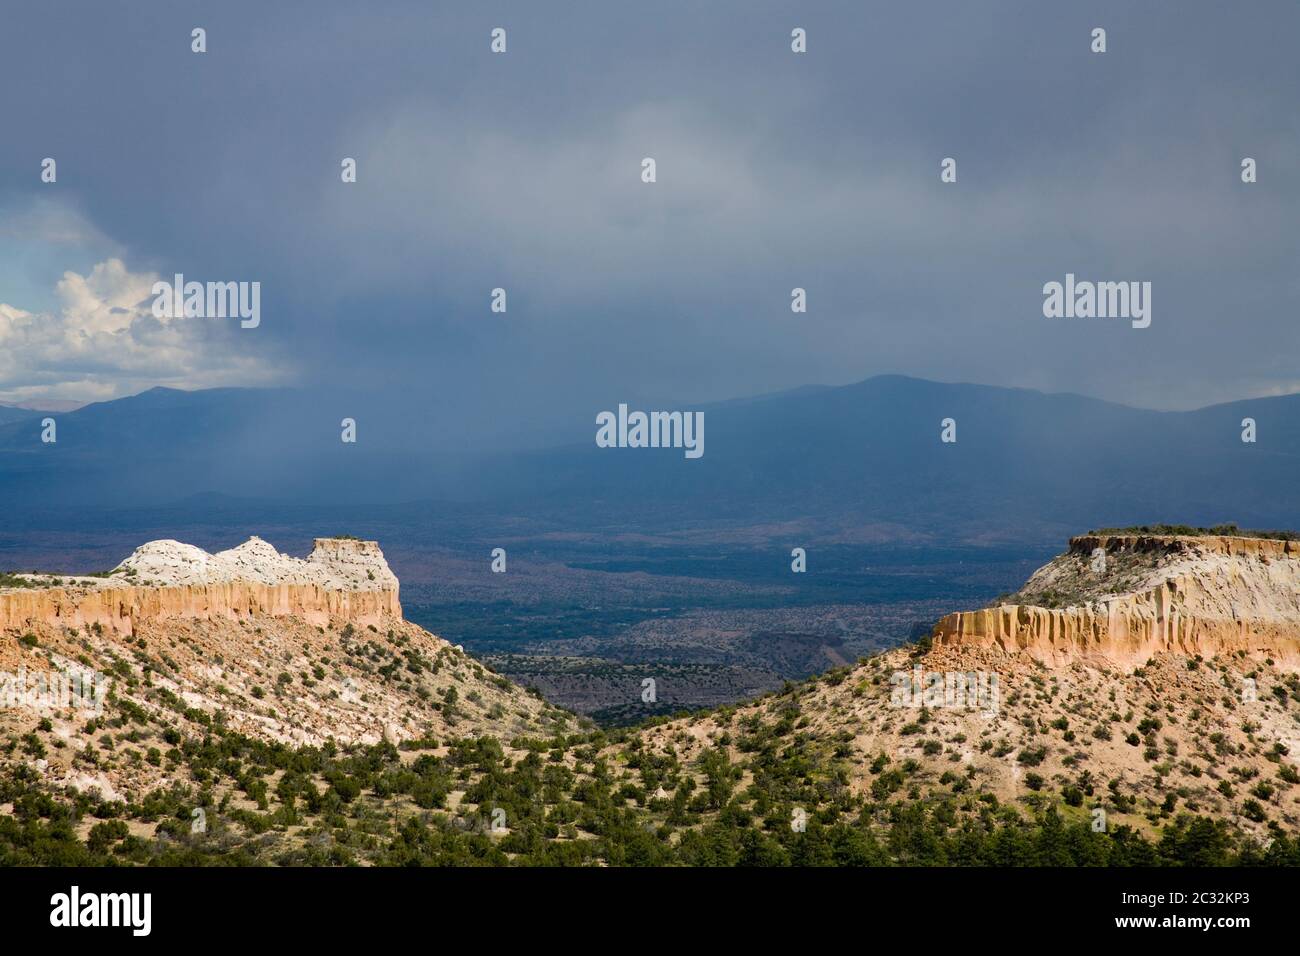 Los Alamos High Resolution Stock Photography And Images Alamy,Marriage Vows